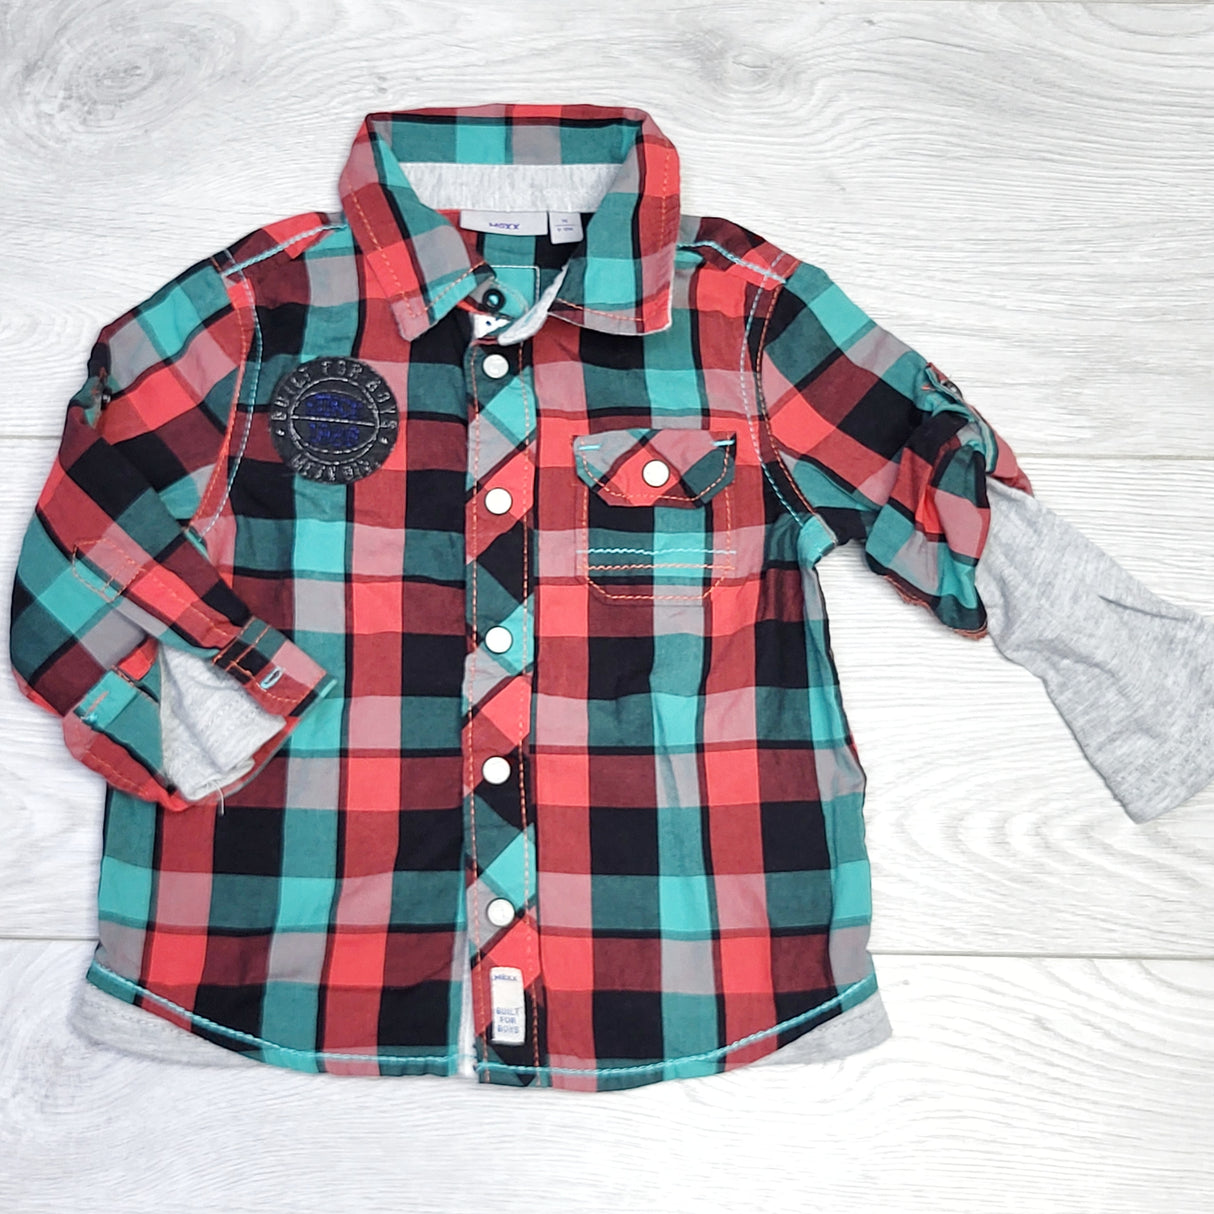 MSNDS11 - Mexx plaid button down fooler shirt with snap buttons. Size 9-12 months